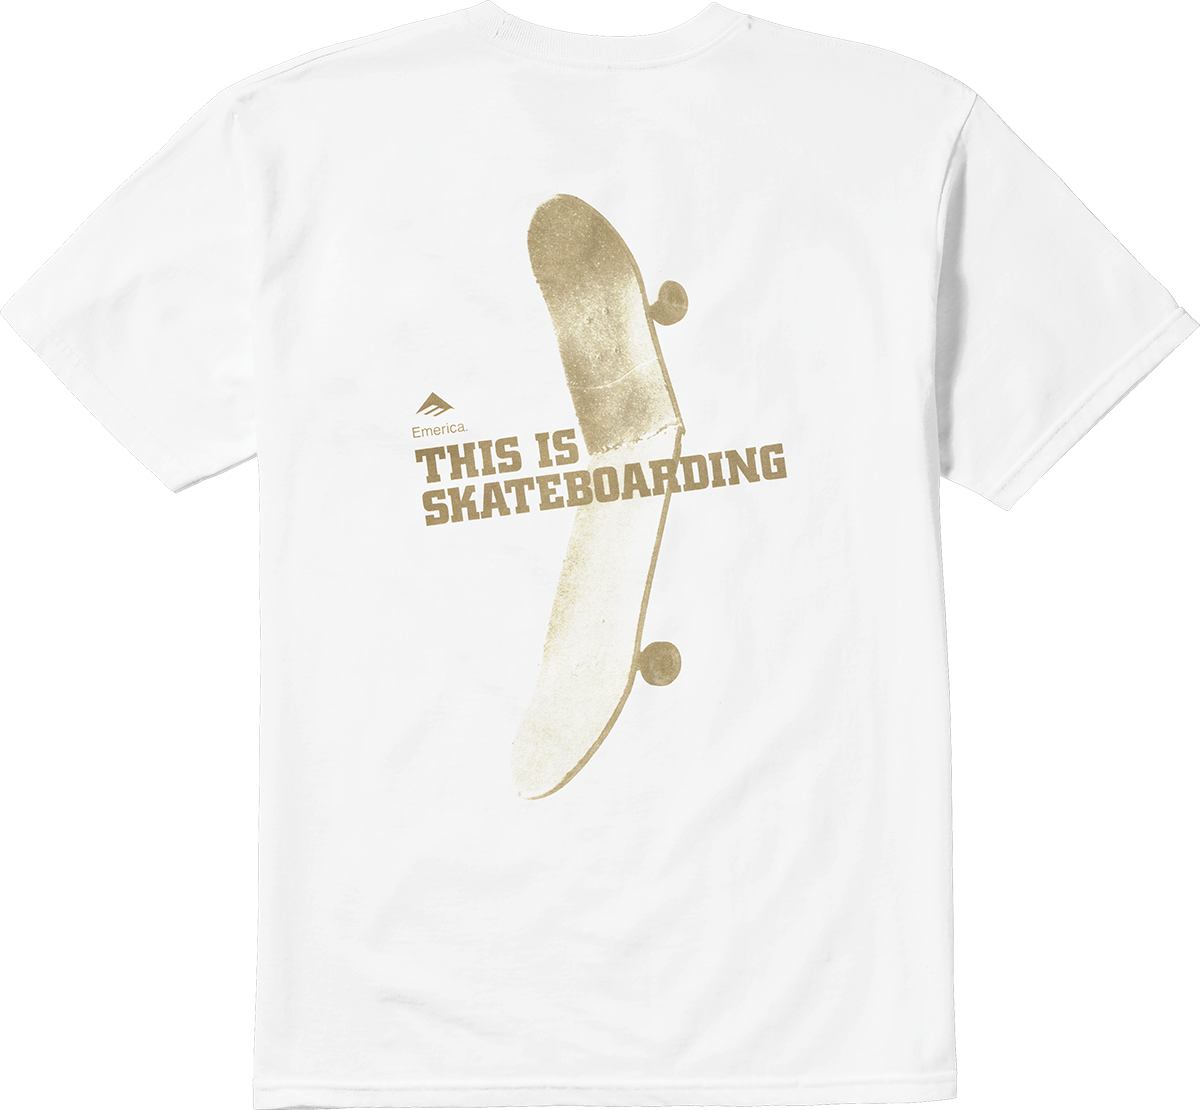 - SKATEBOARDING IS PULLOVER emerica-us THIS